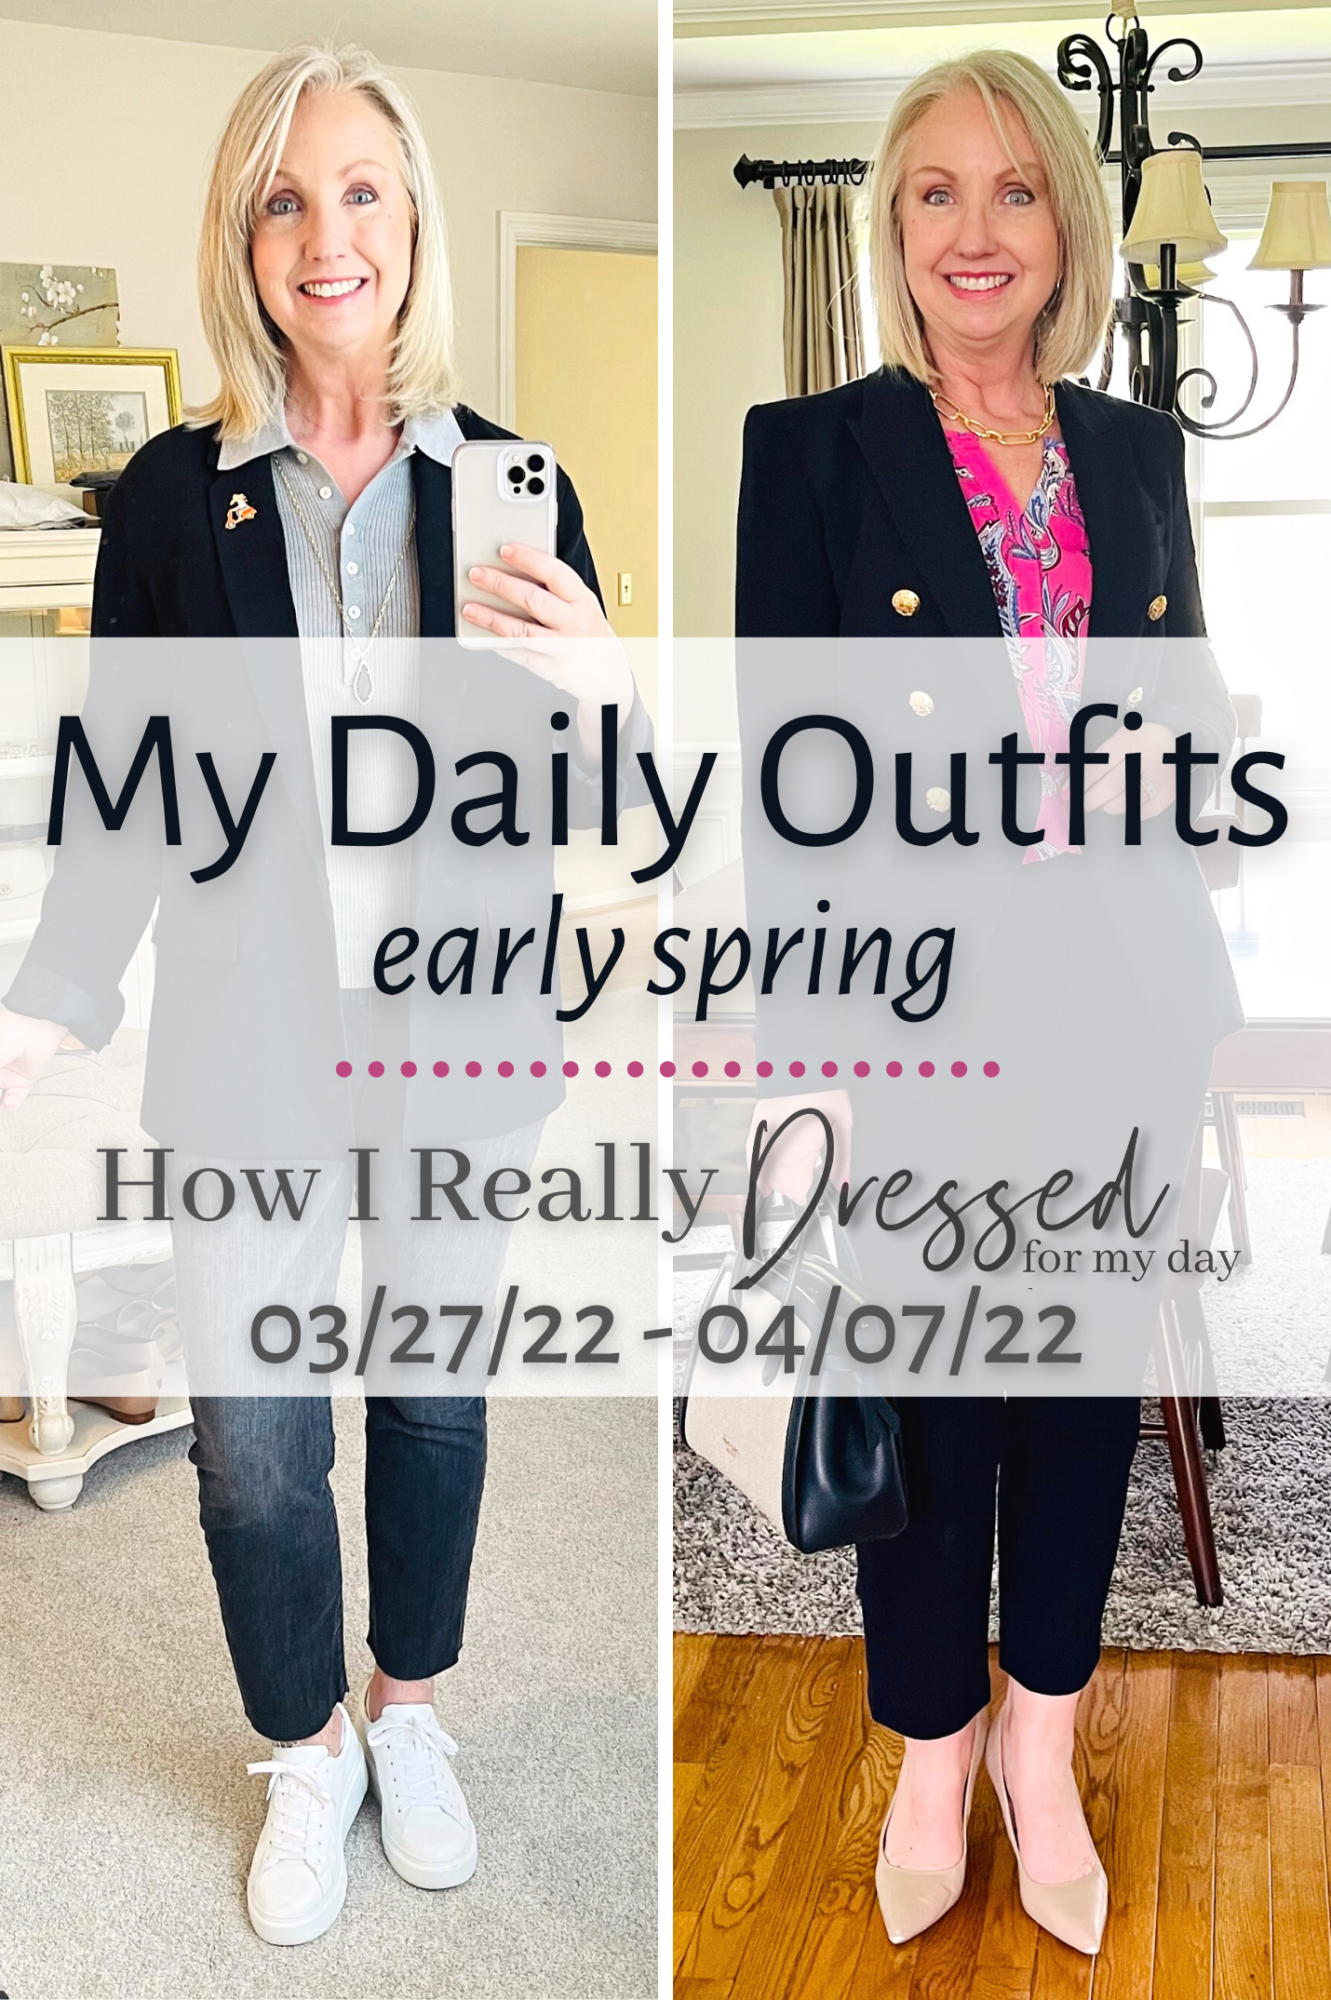 My Daily Outfits Early Spring 2022